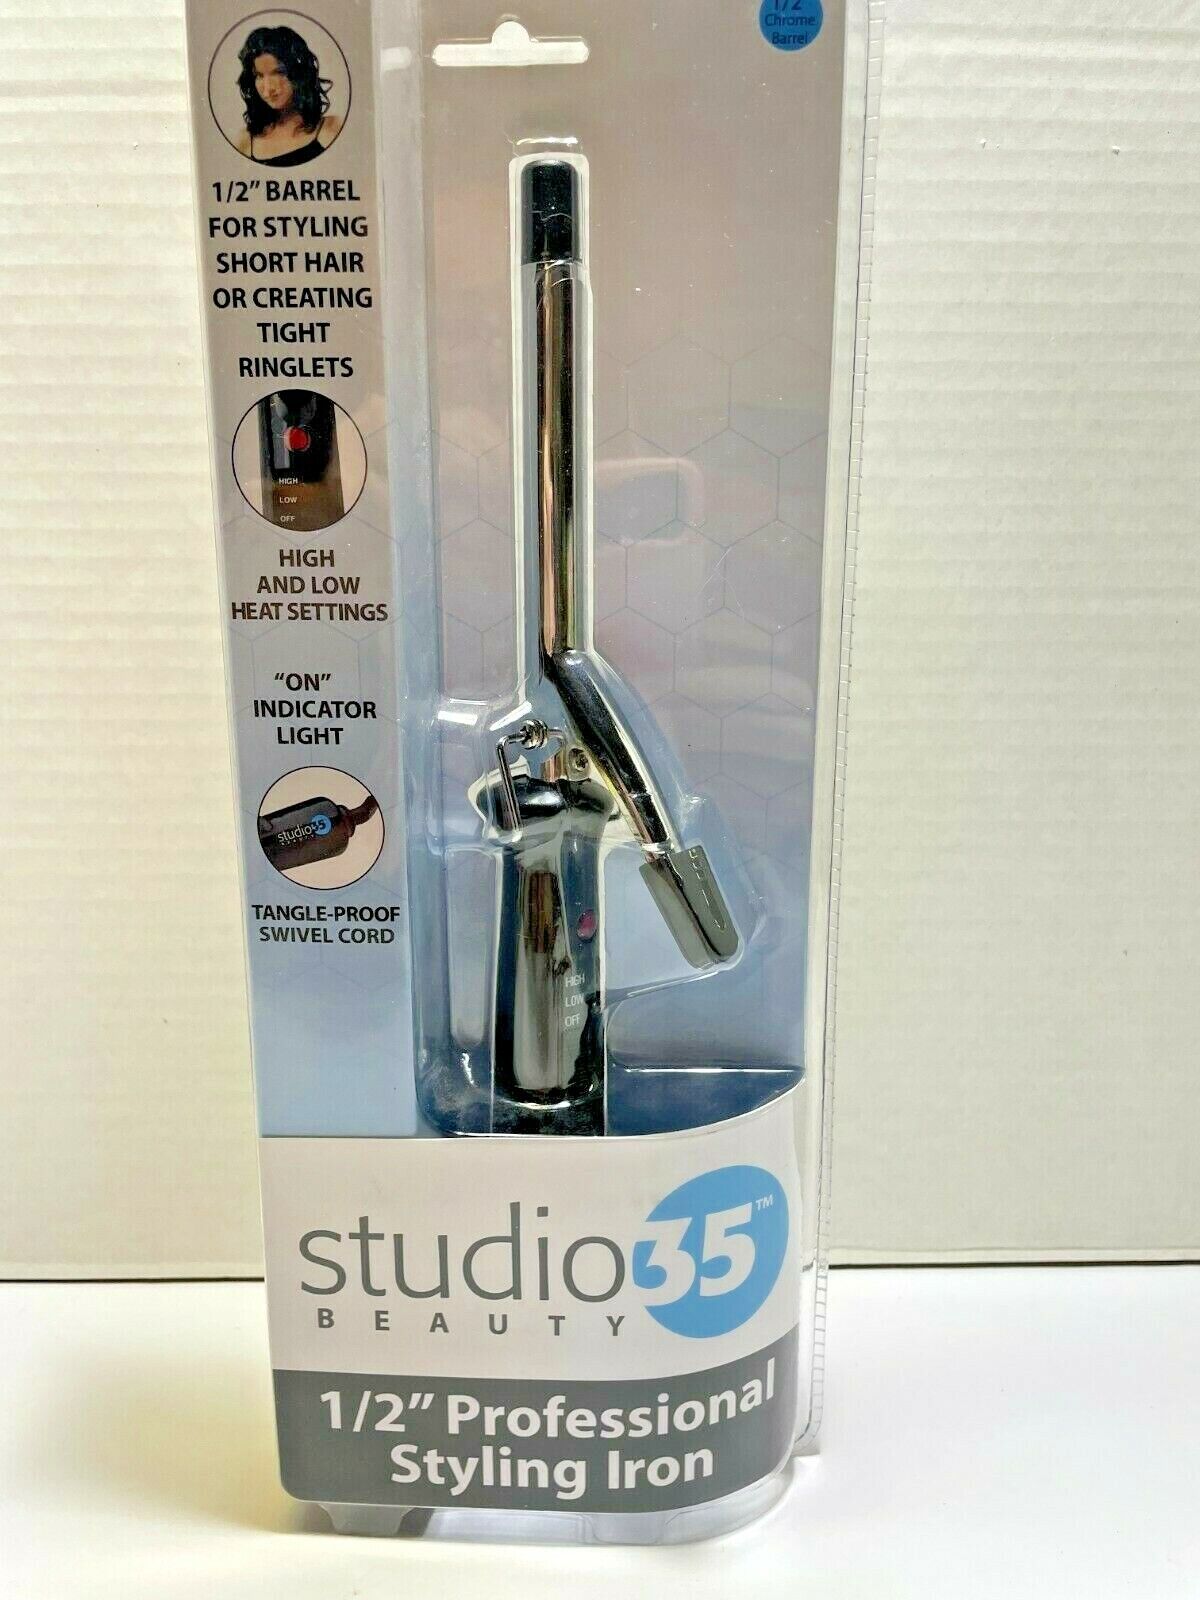 Studio 35 Beauty CURLING IRON 1 Model Silver Barrel Sho Black 2” Recommended New popularity